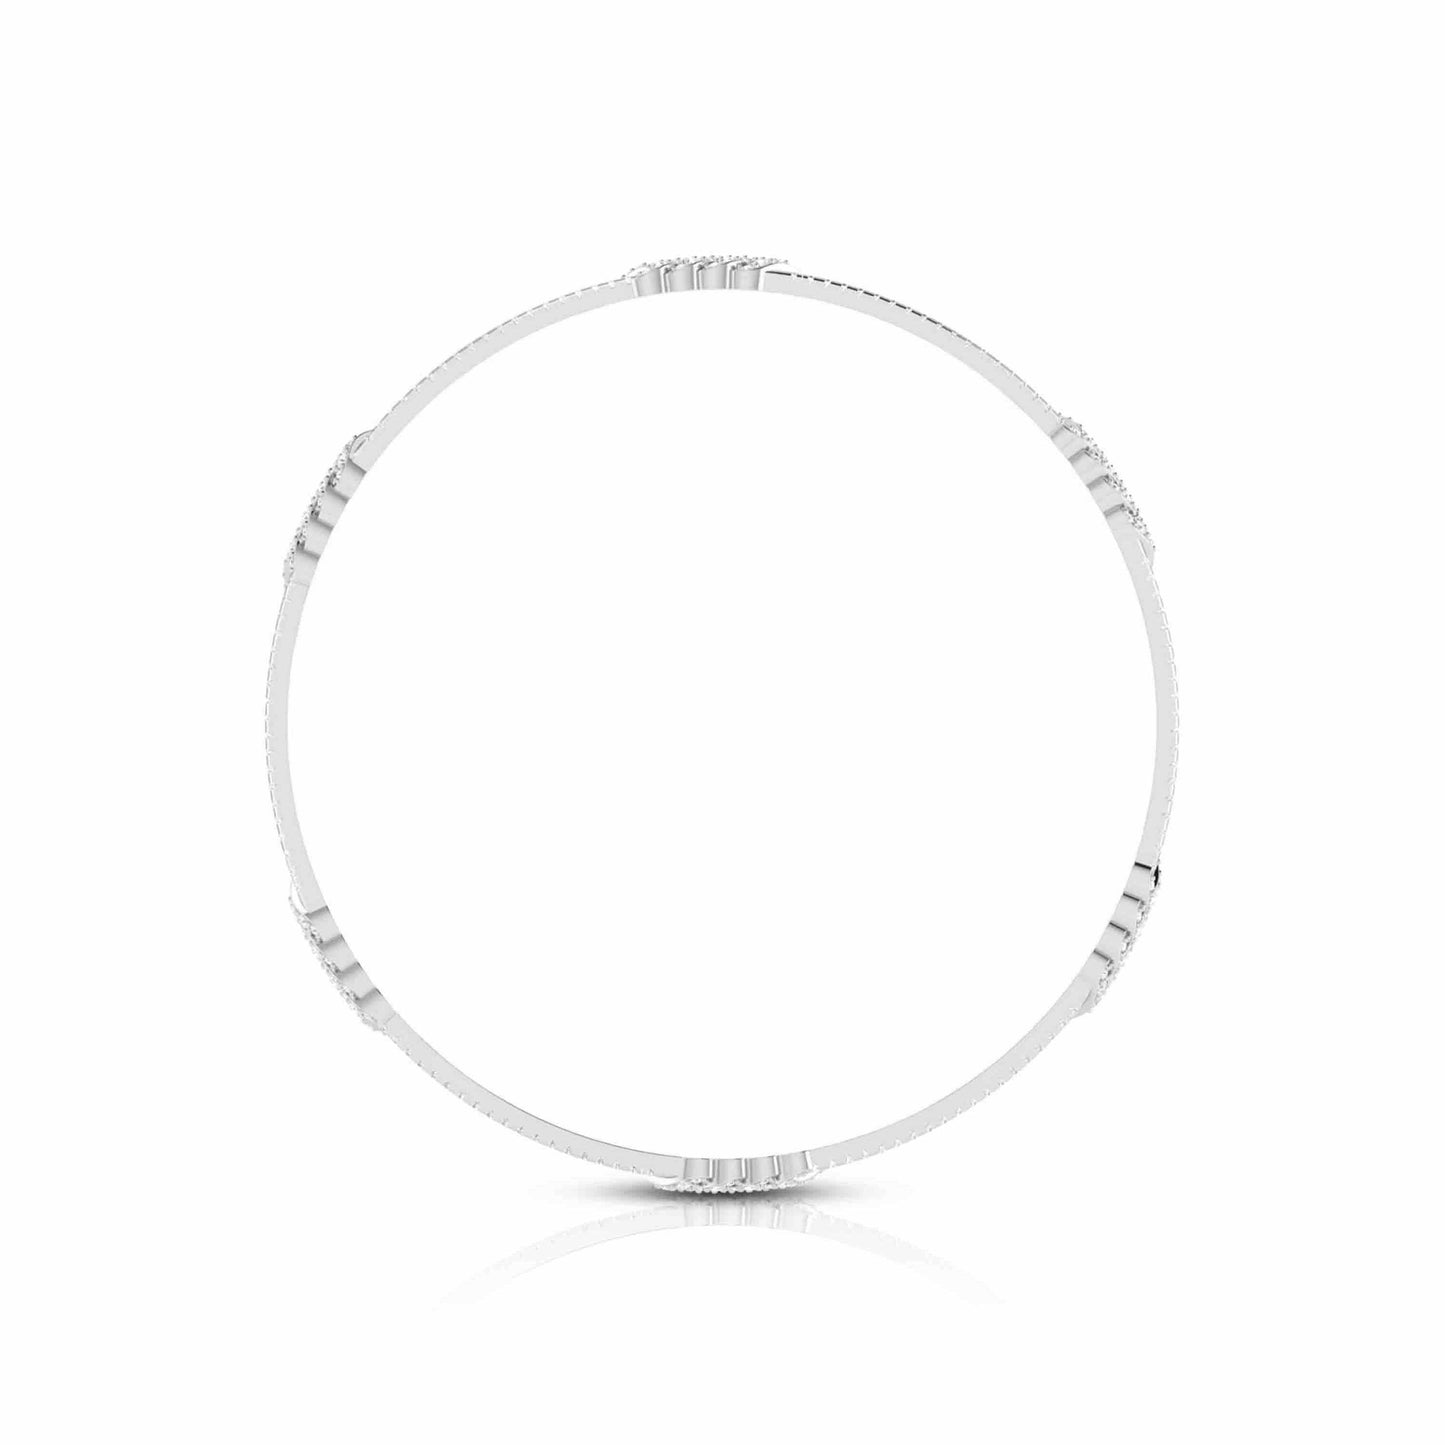 Load image into Gallery viewer, Classy Daily Wear Bangle Fiona Diamonds
